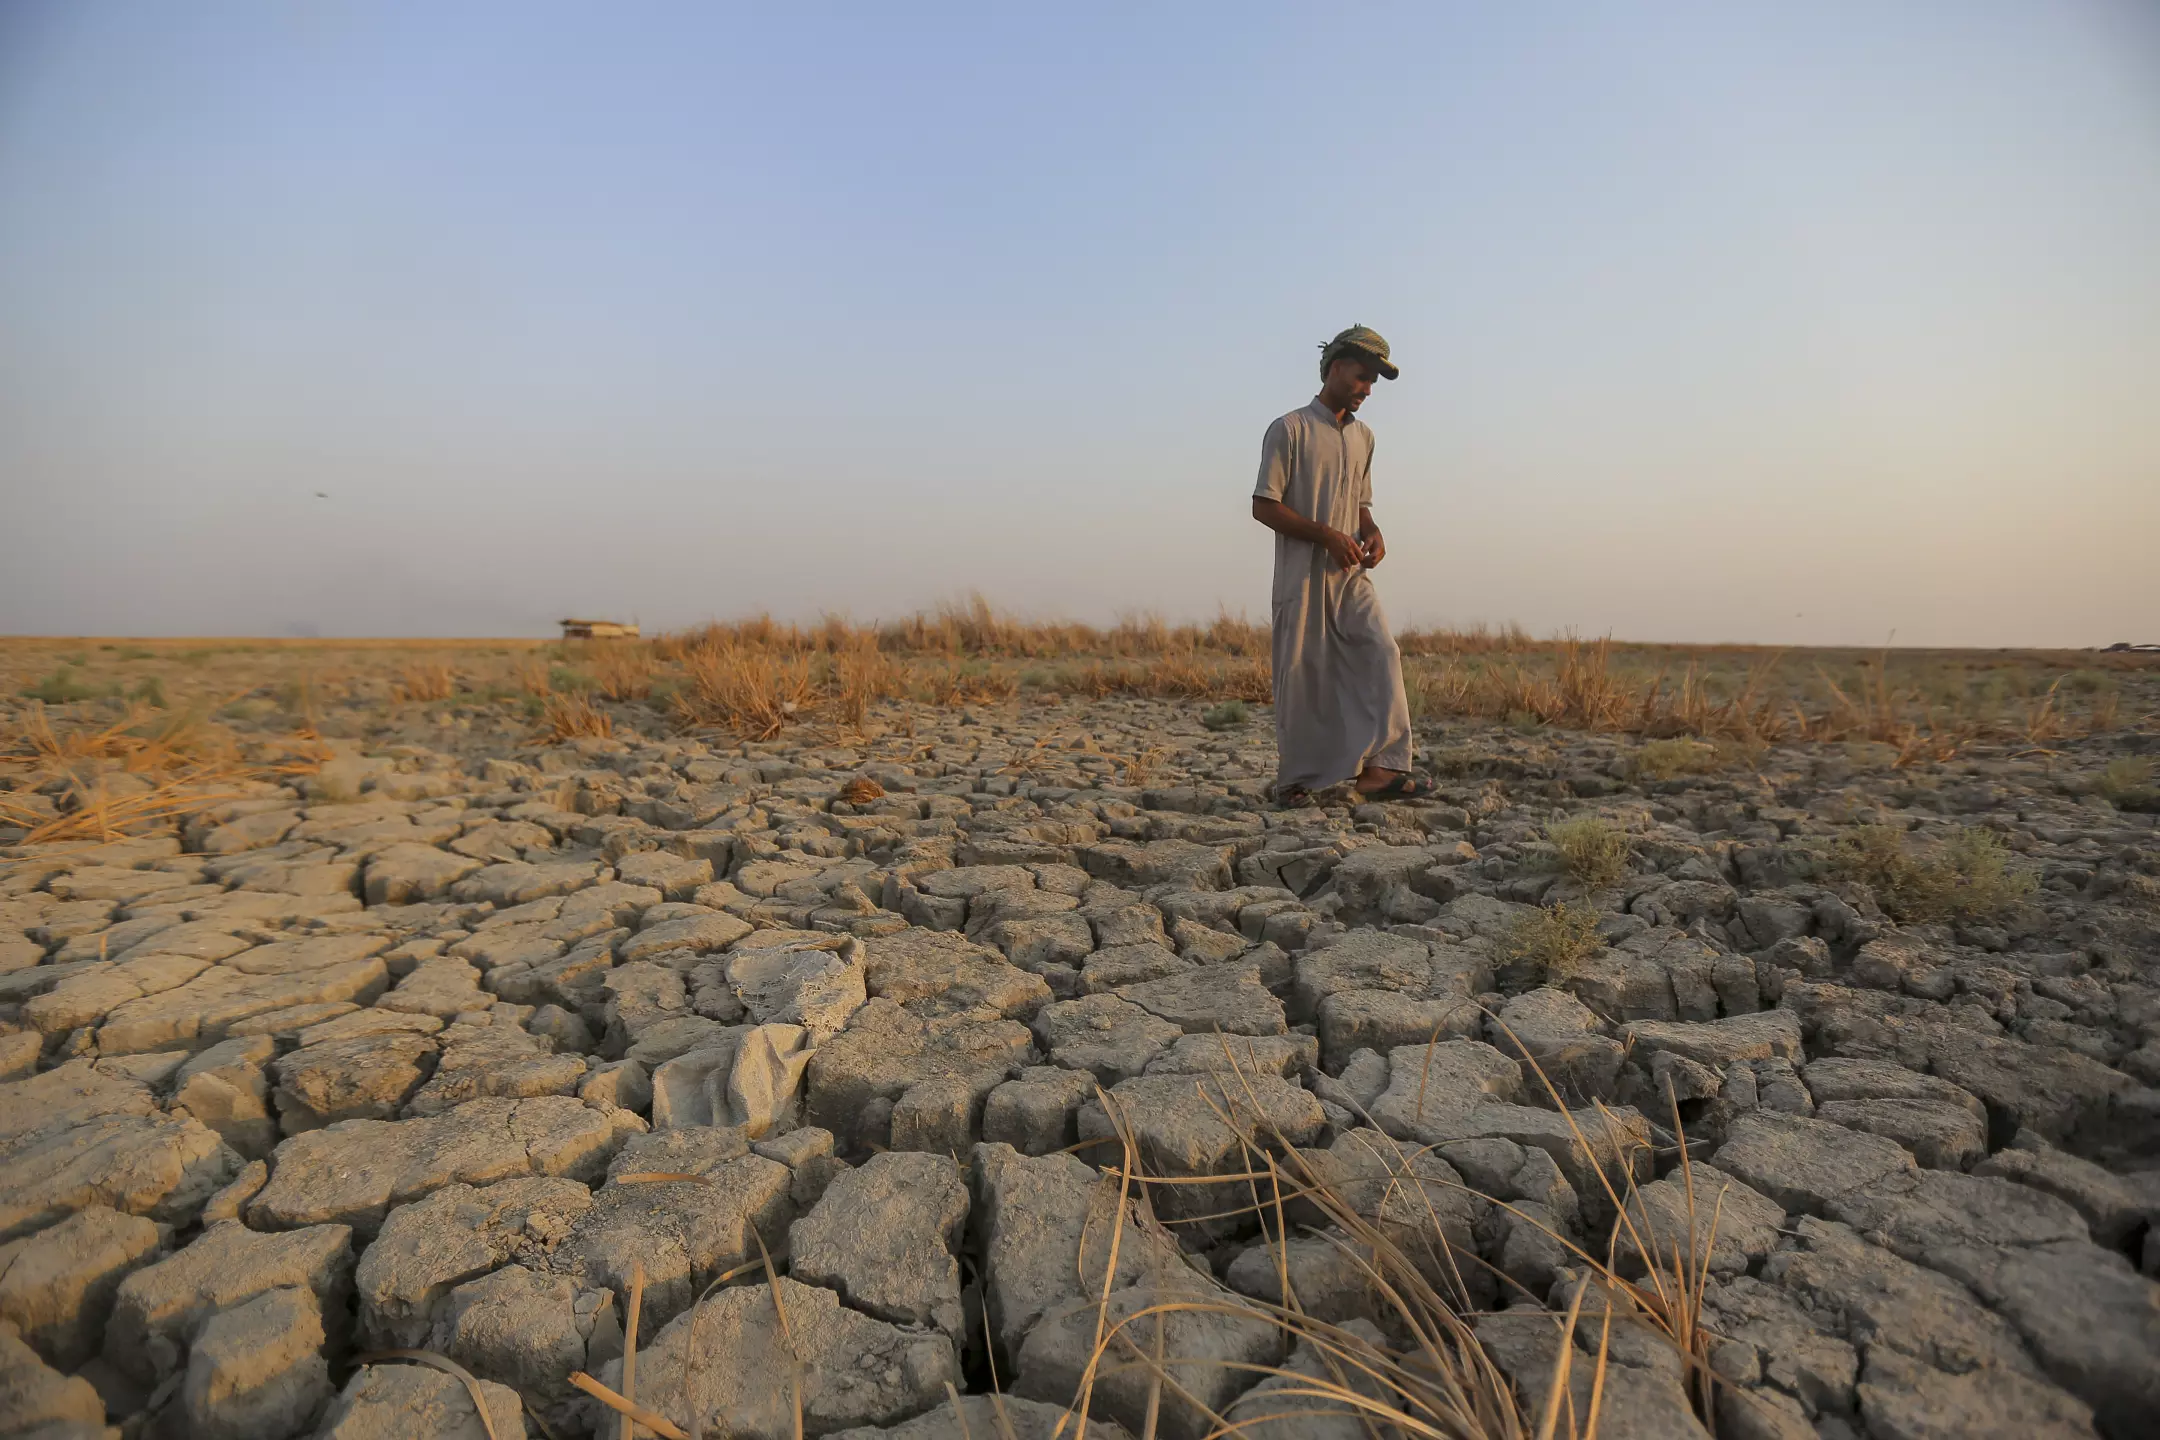 A fisherman walks across a dry patch of land in the marshes in Dhi Qar province, Iraq, during a severe drought in 2022. Photo: Anmar Khalil / Associated Press